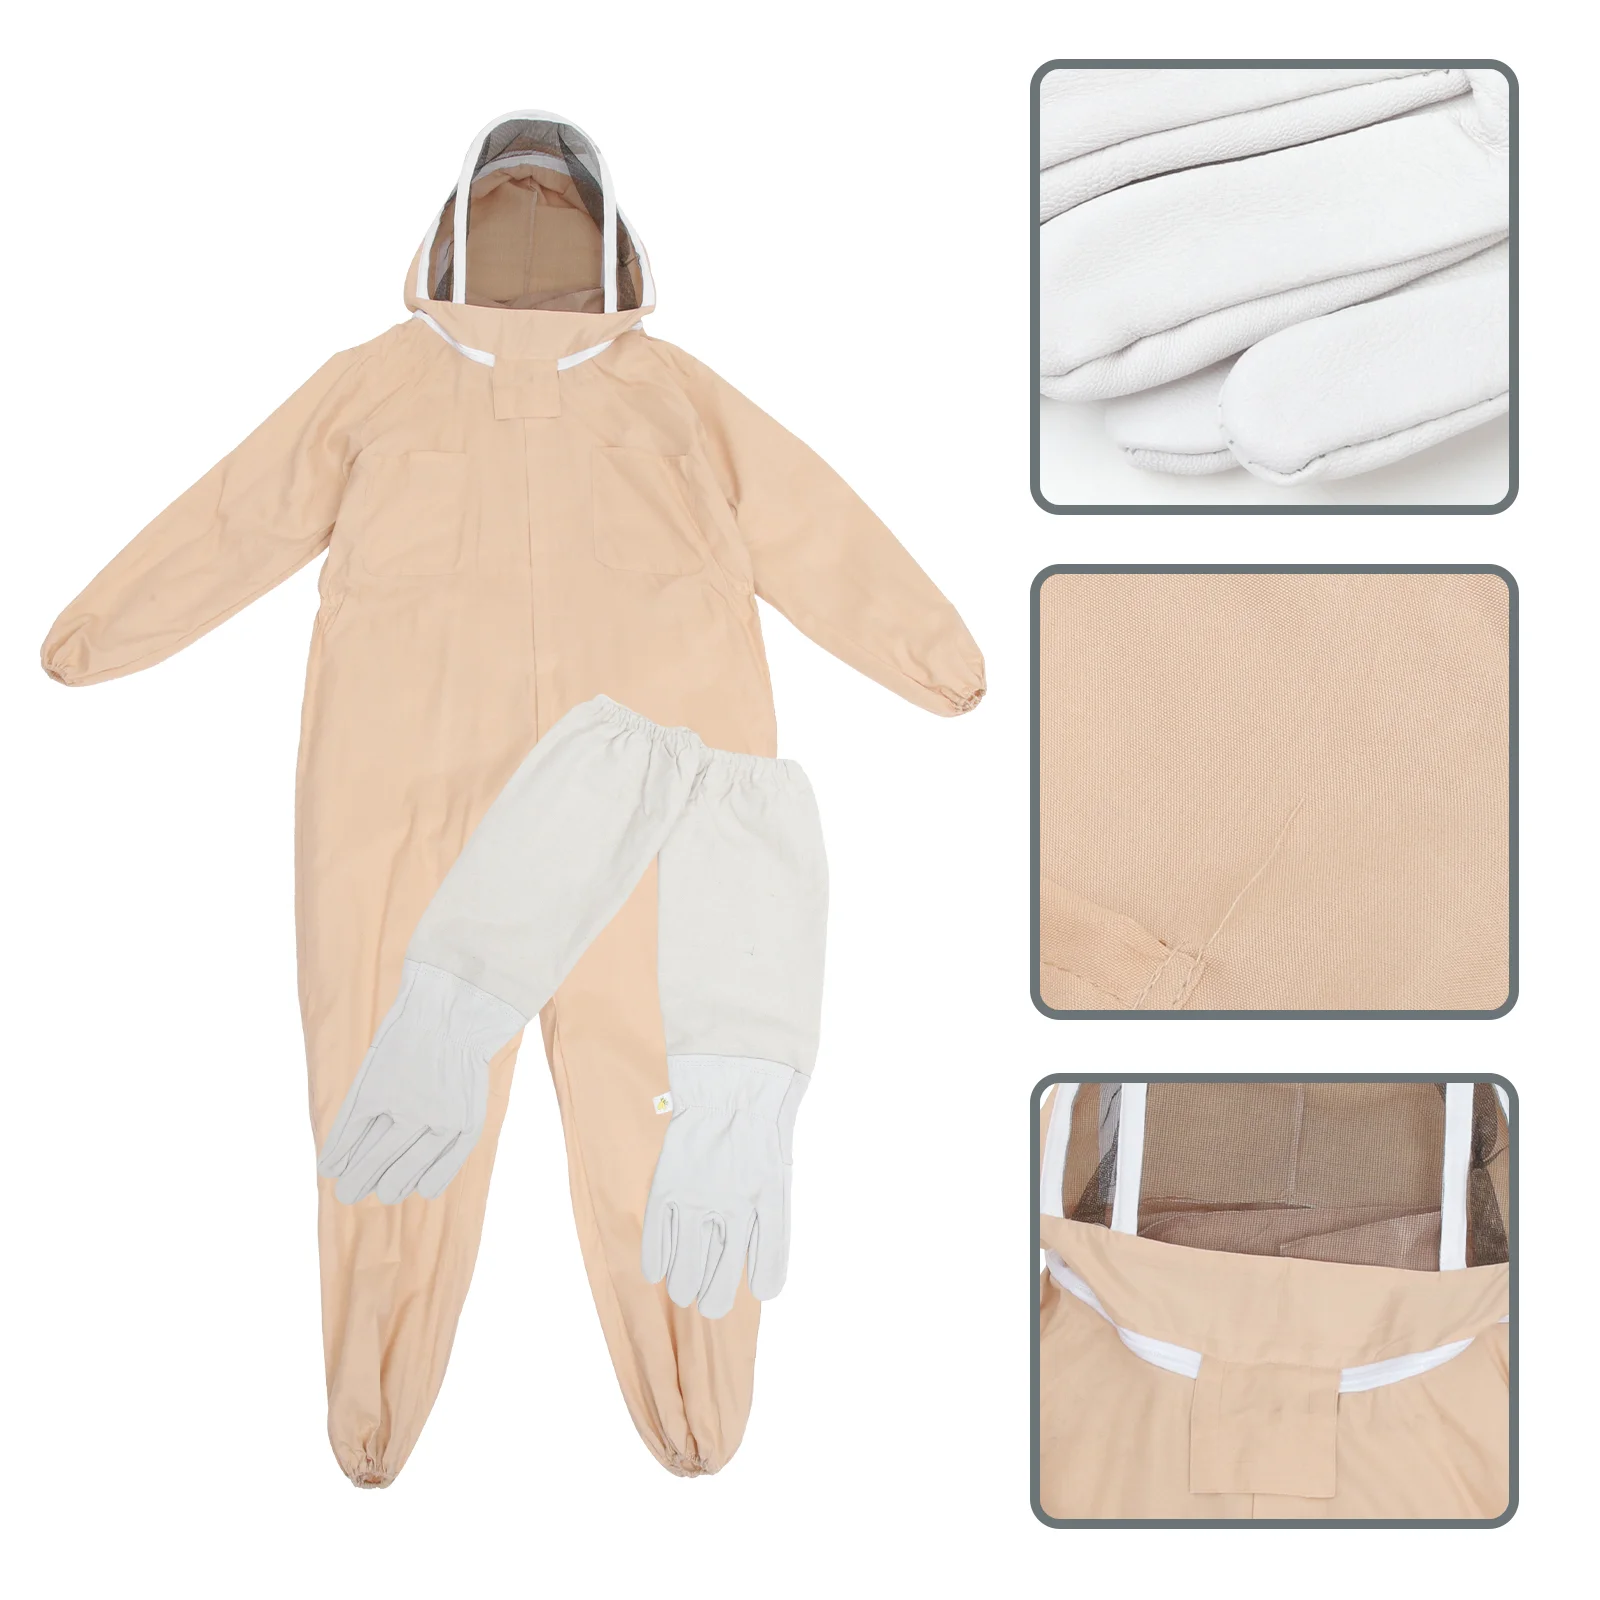 

Protective Anti Bee Practical Breathable Beekeeping Clothing Veil Hood with Gloves Beekeeping Supplies Body Protective Suit